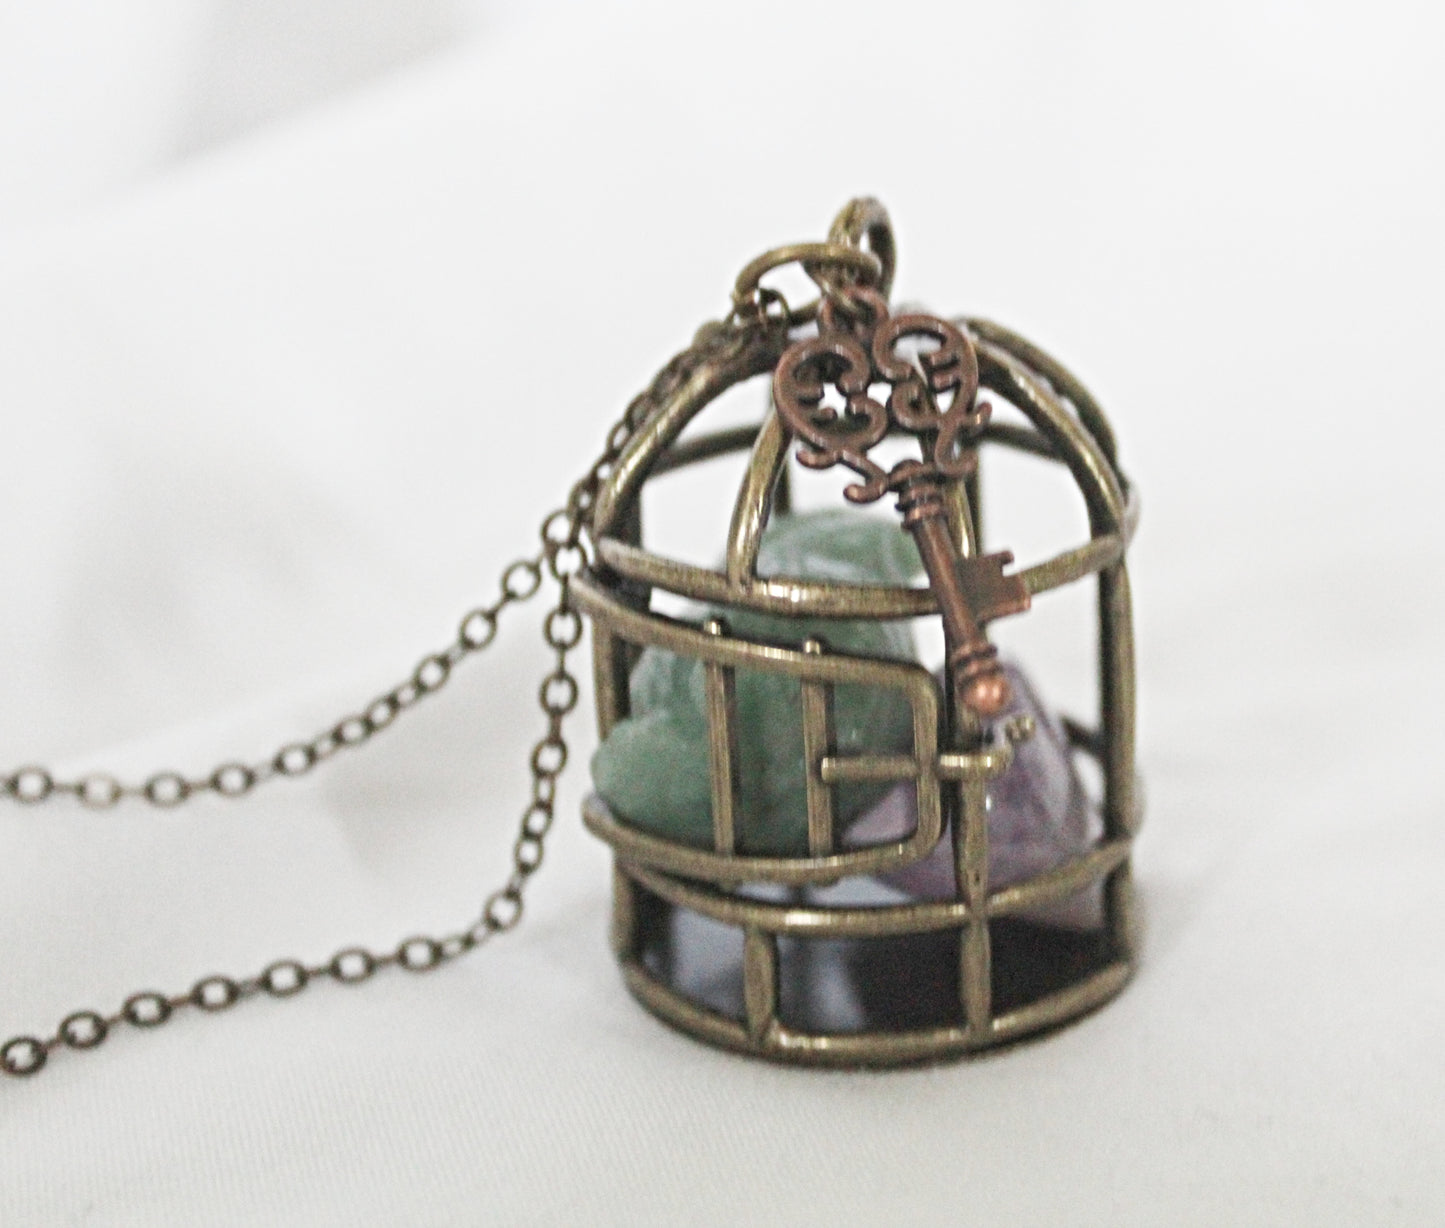 Birdcage Crystal Necklace Featuring Green Aventurine and Amethyst